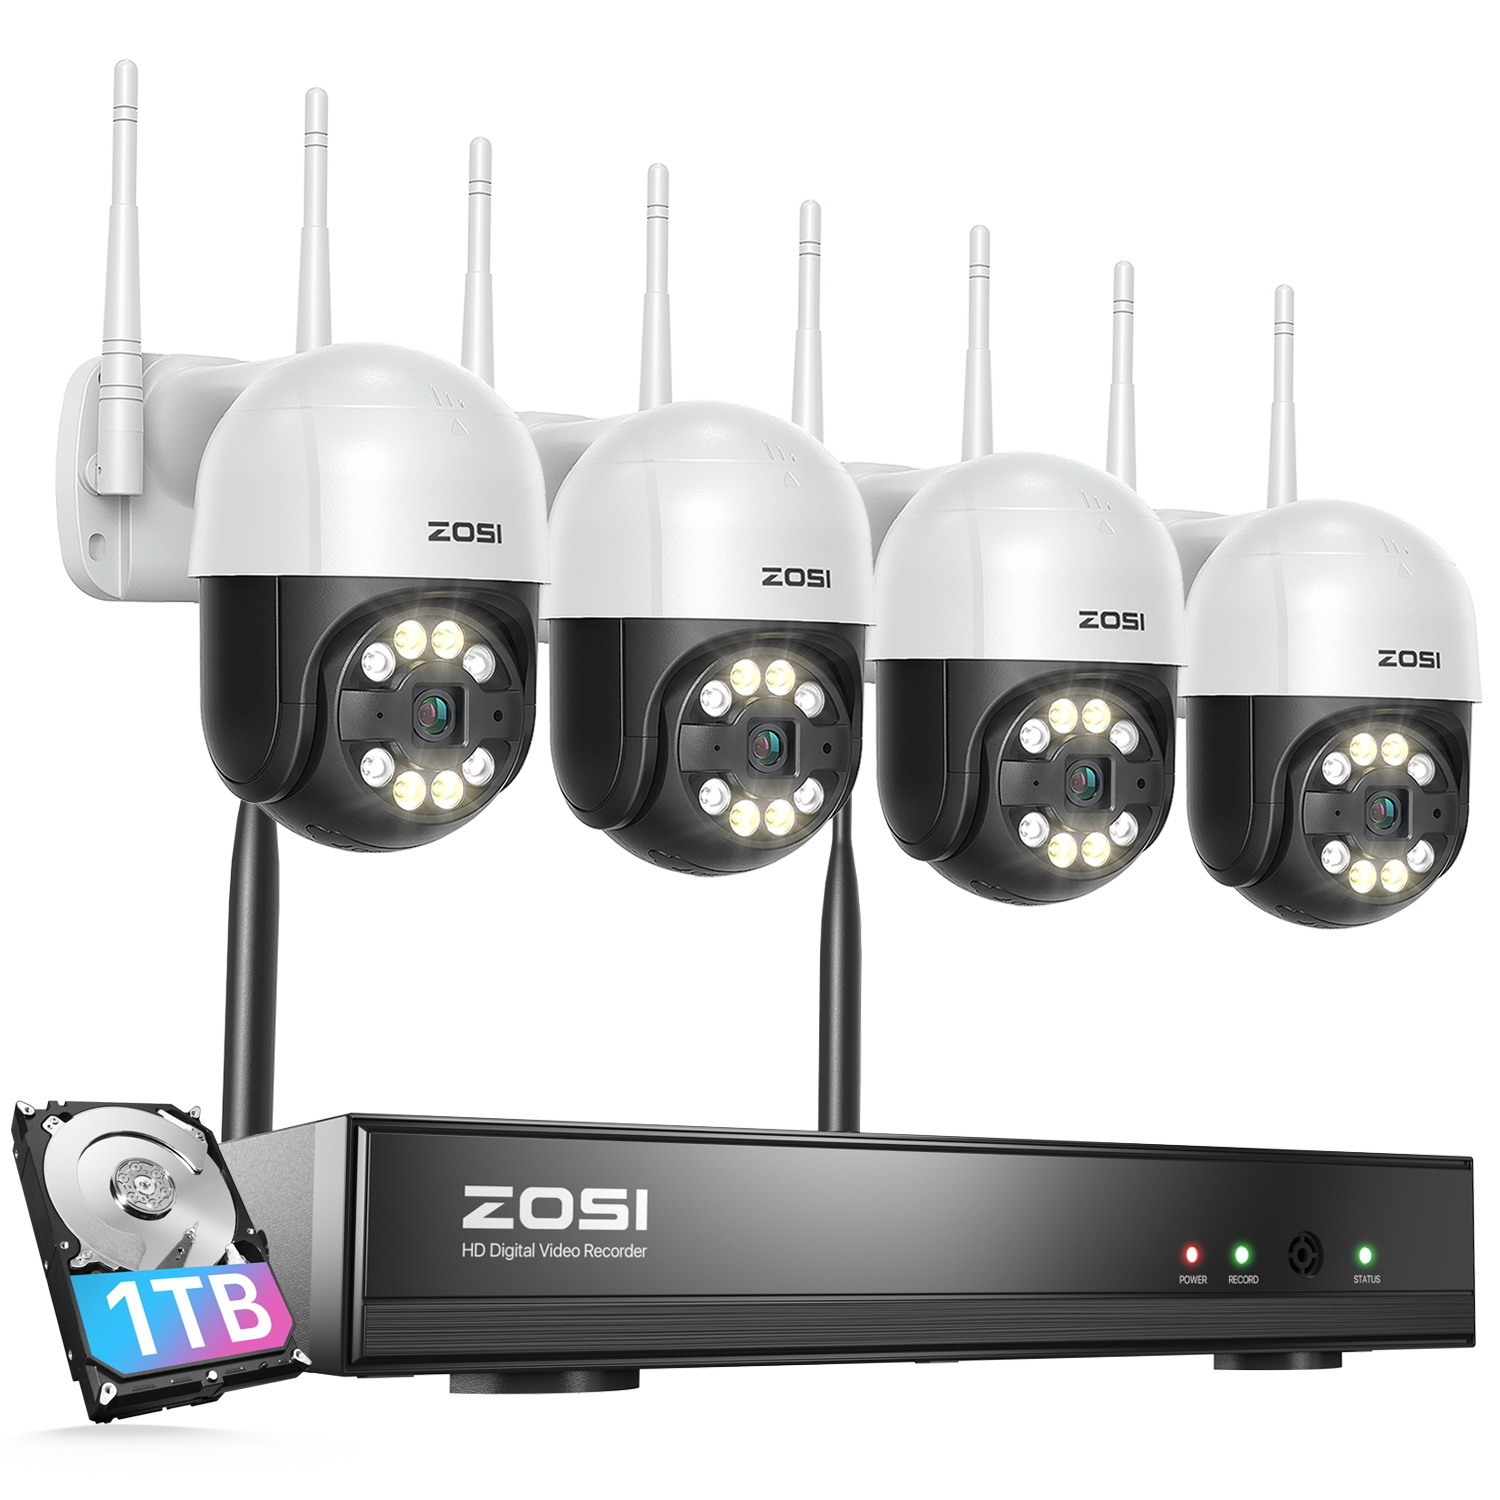 ZOSI 2K 3MP 8CH NVR Home Security Camera System with 1TB HDD, 4pcs 355° Pan/Tilt Wireless WiFi Outdoor Surveillance Cameras, 2-Way Audio, Human Detection, Color Night Vision